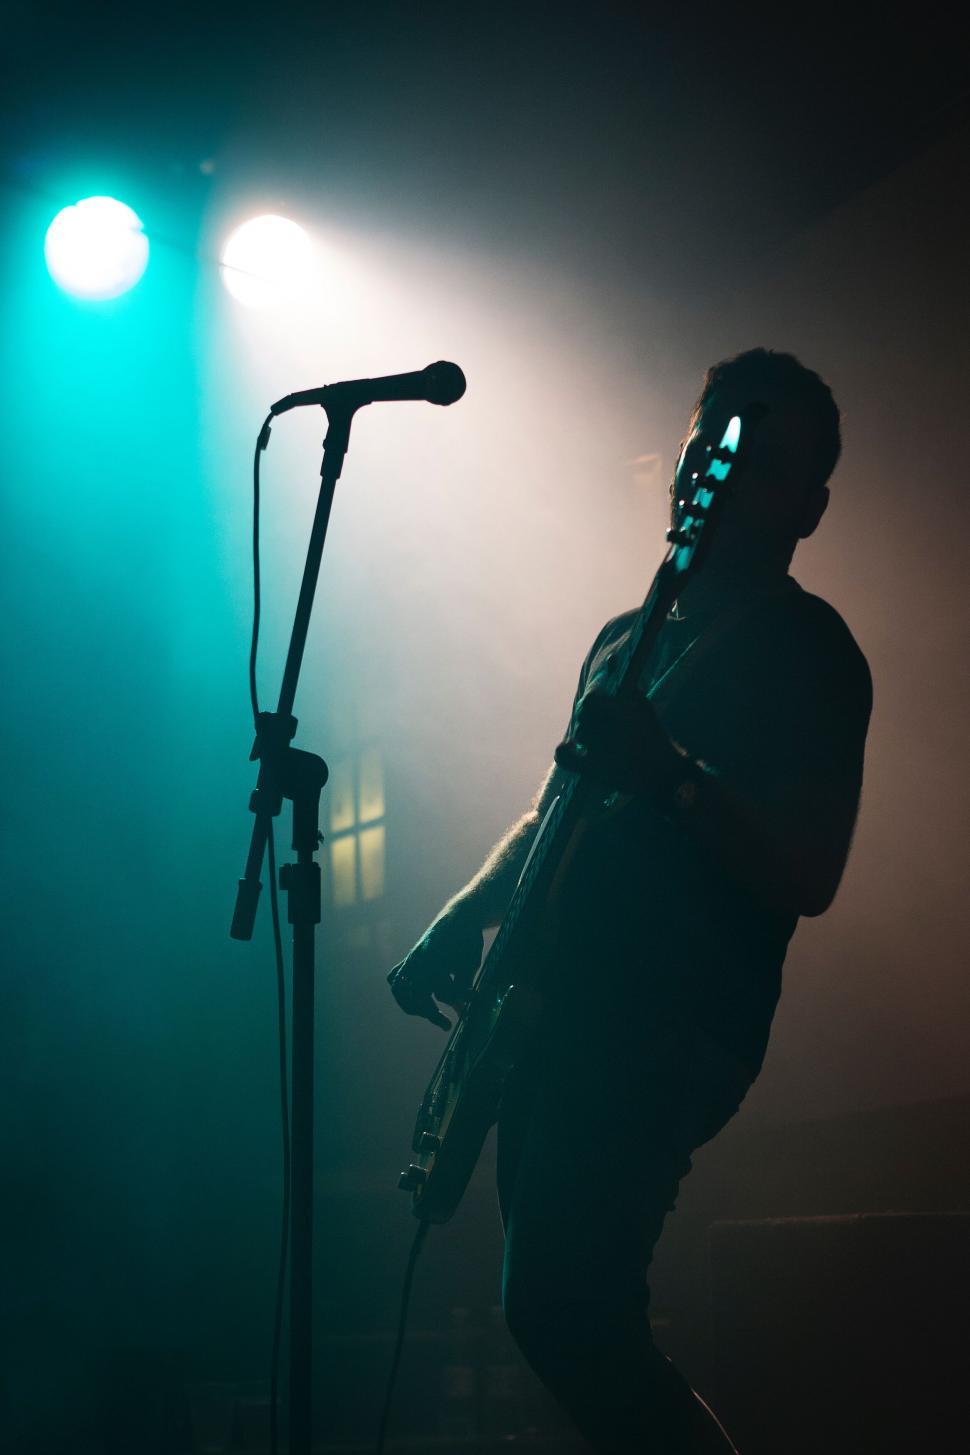 Free Image of Silhouette of a musician on stage 